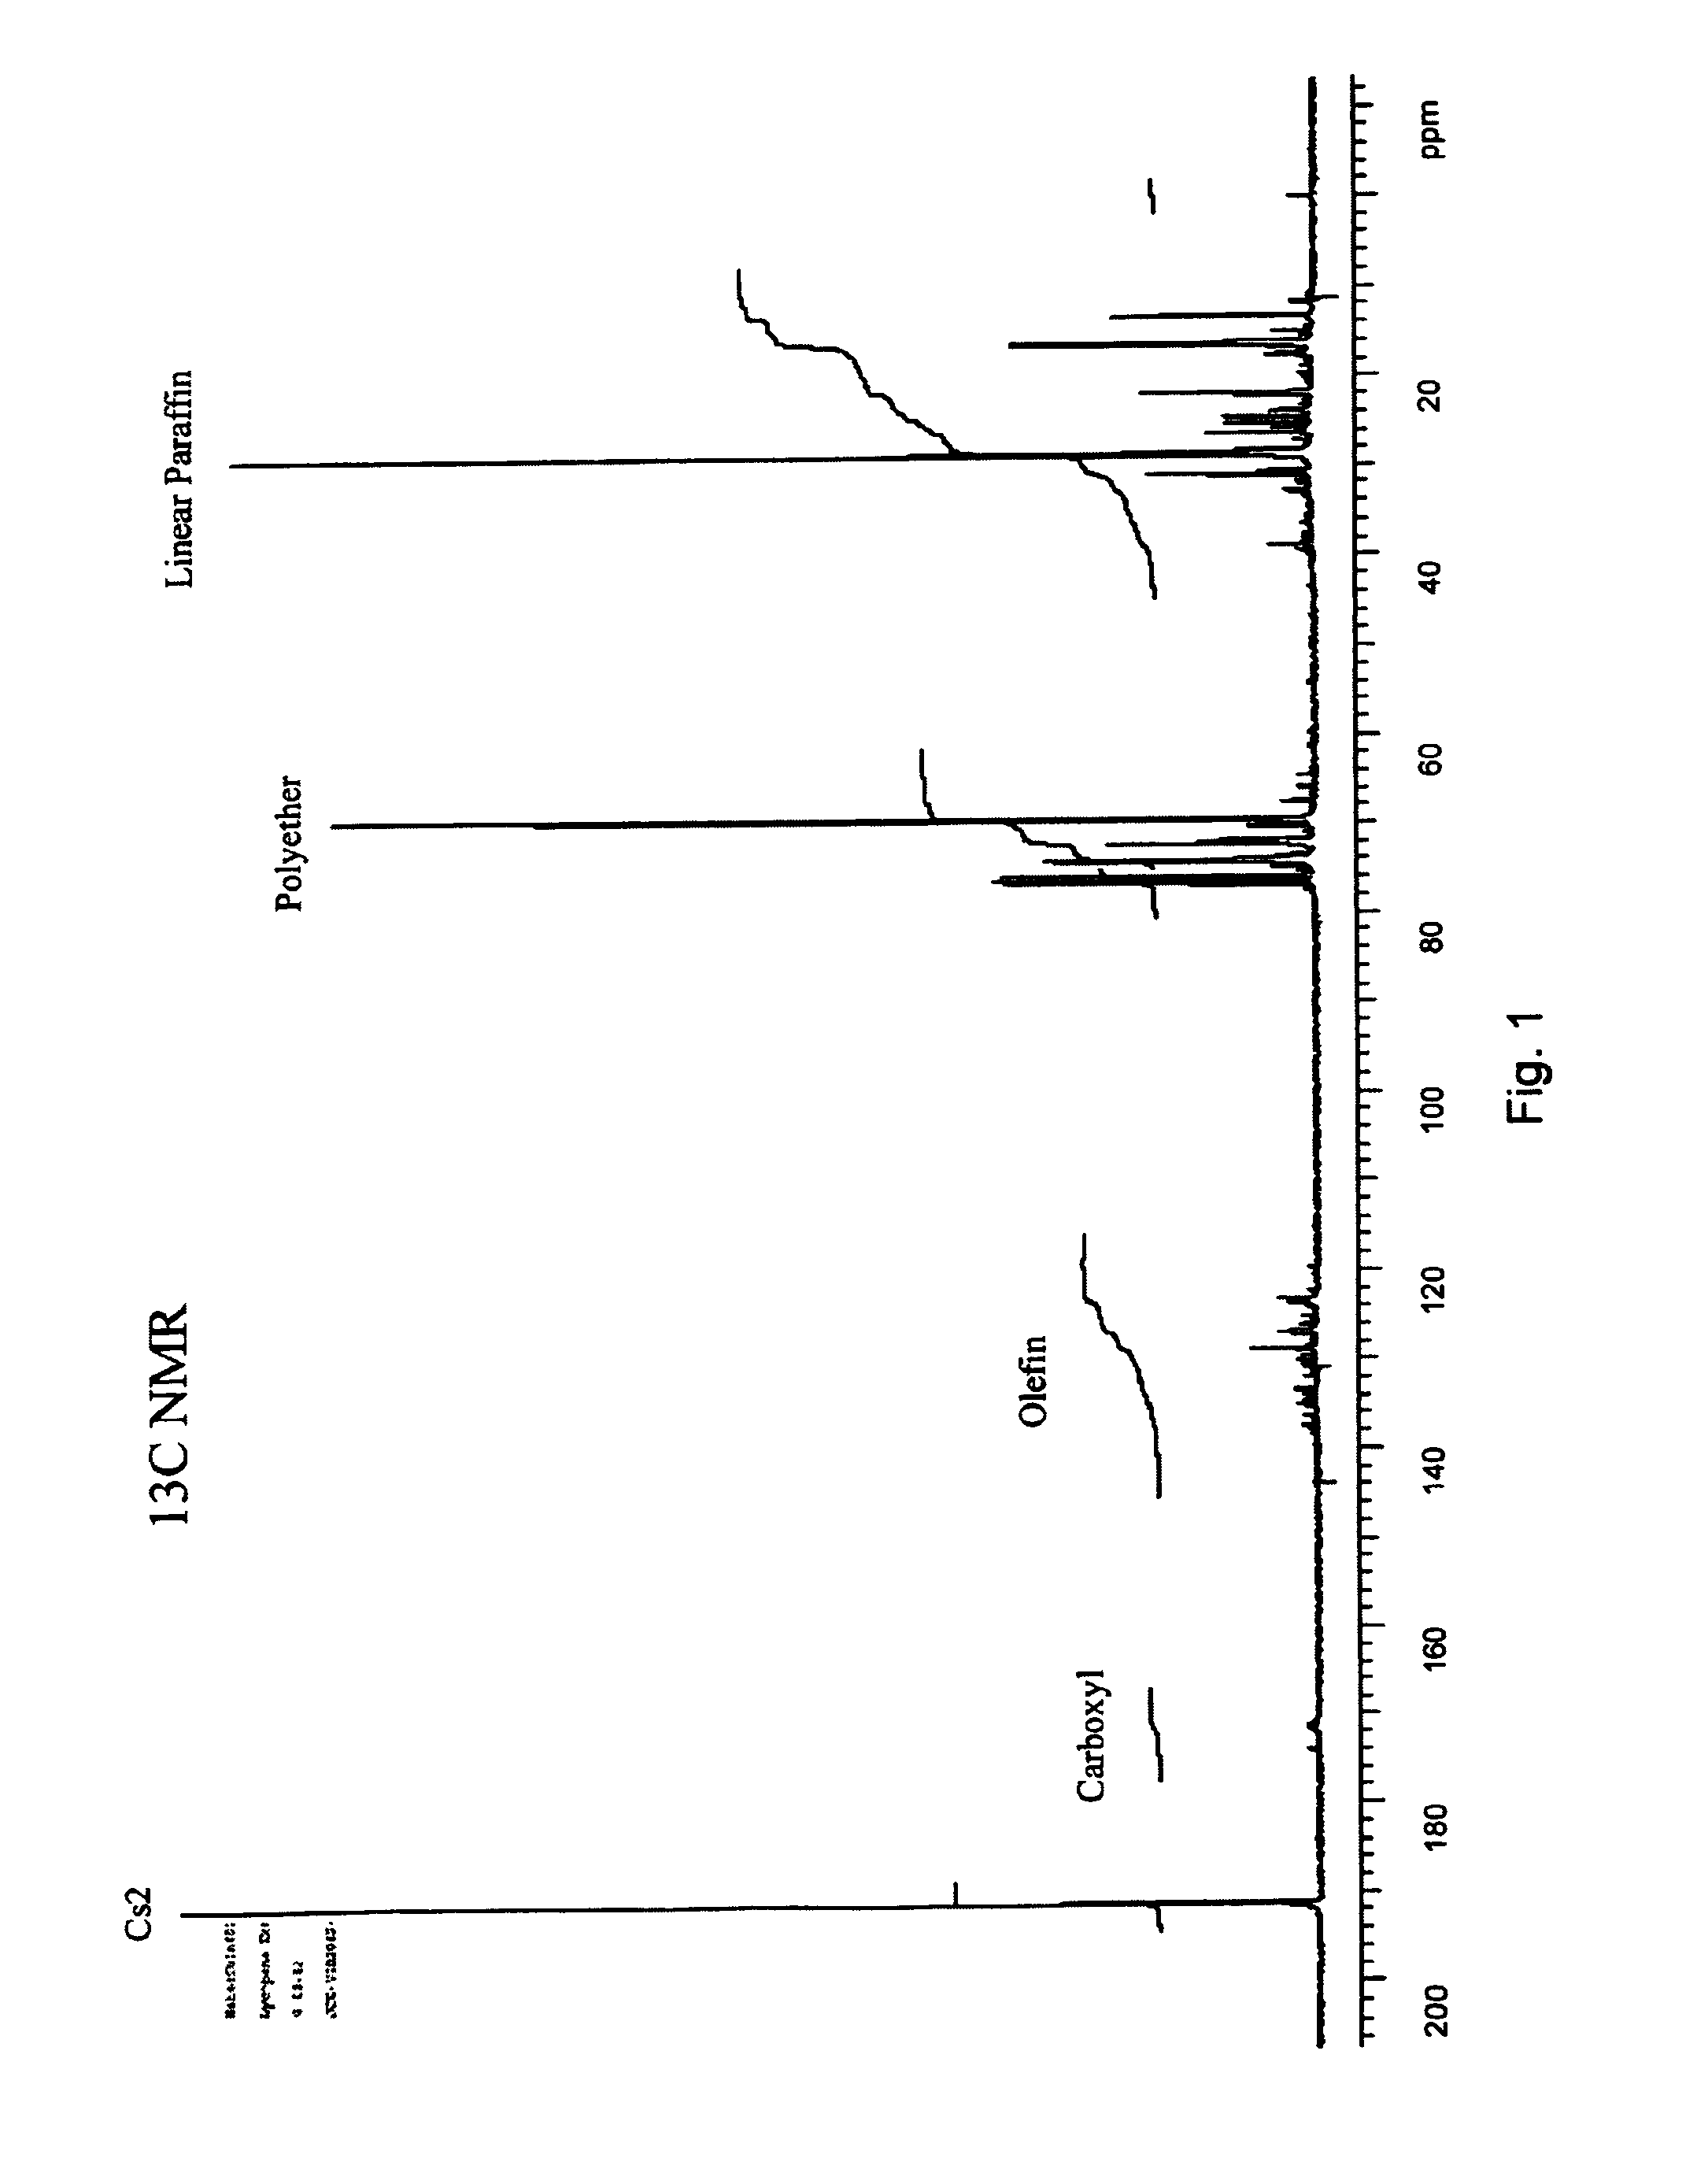 Process for extracting carotenoids from fruit and vegetable processing waste